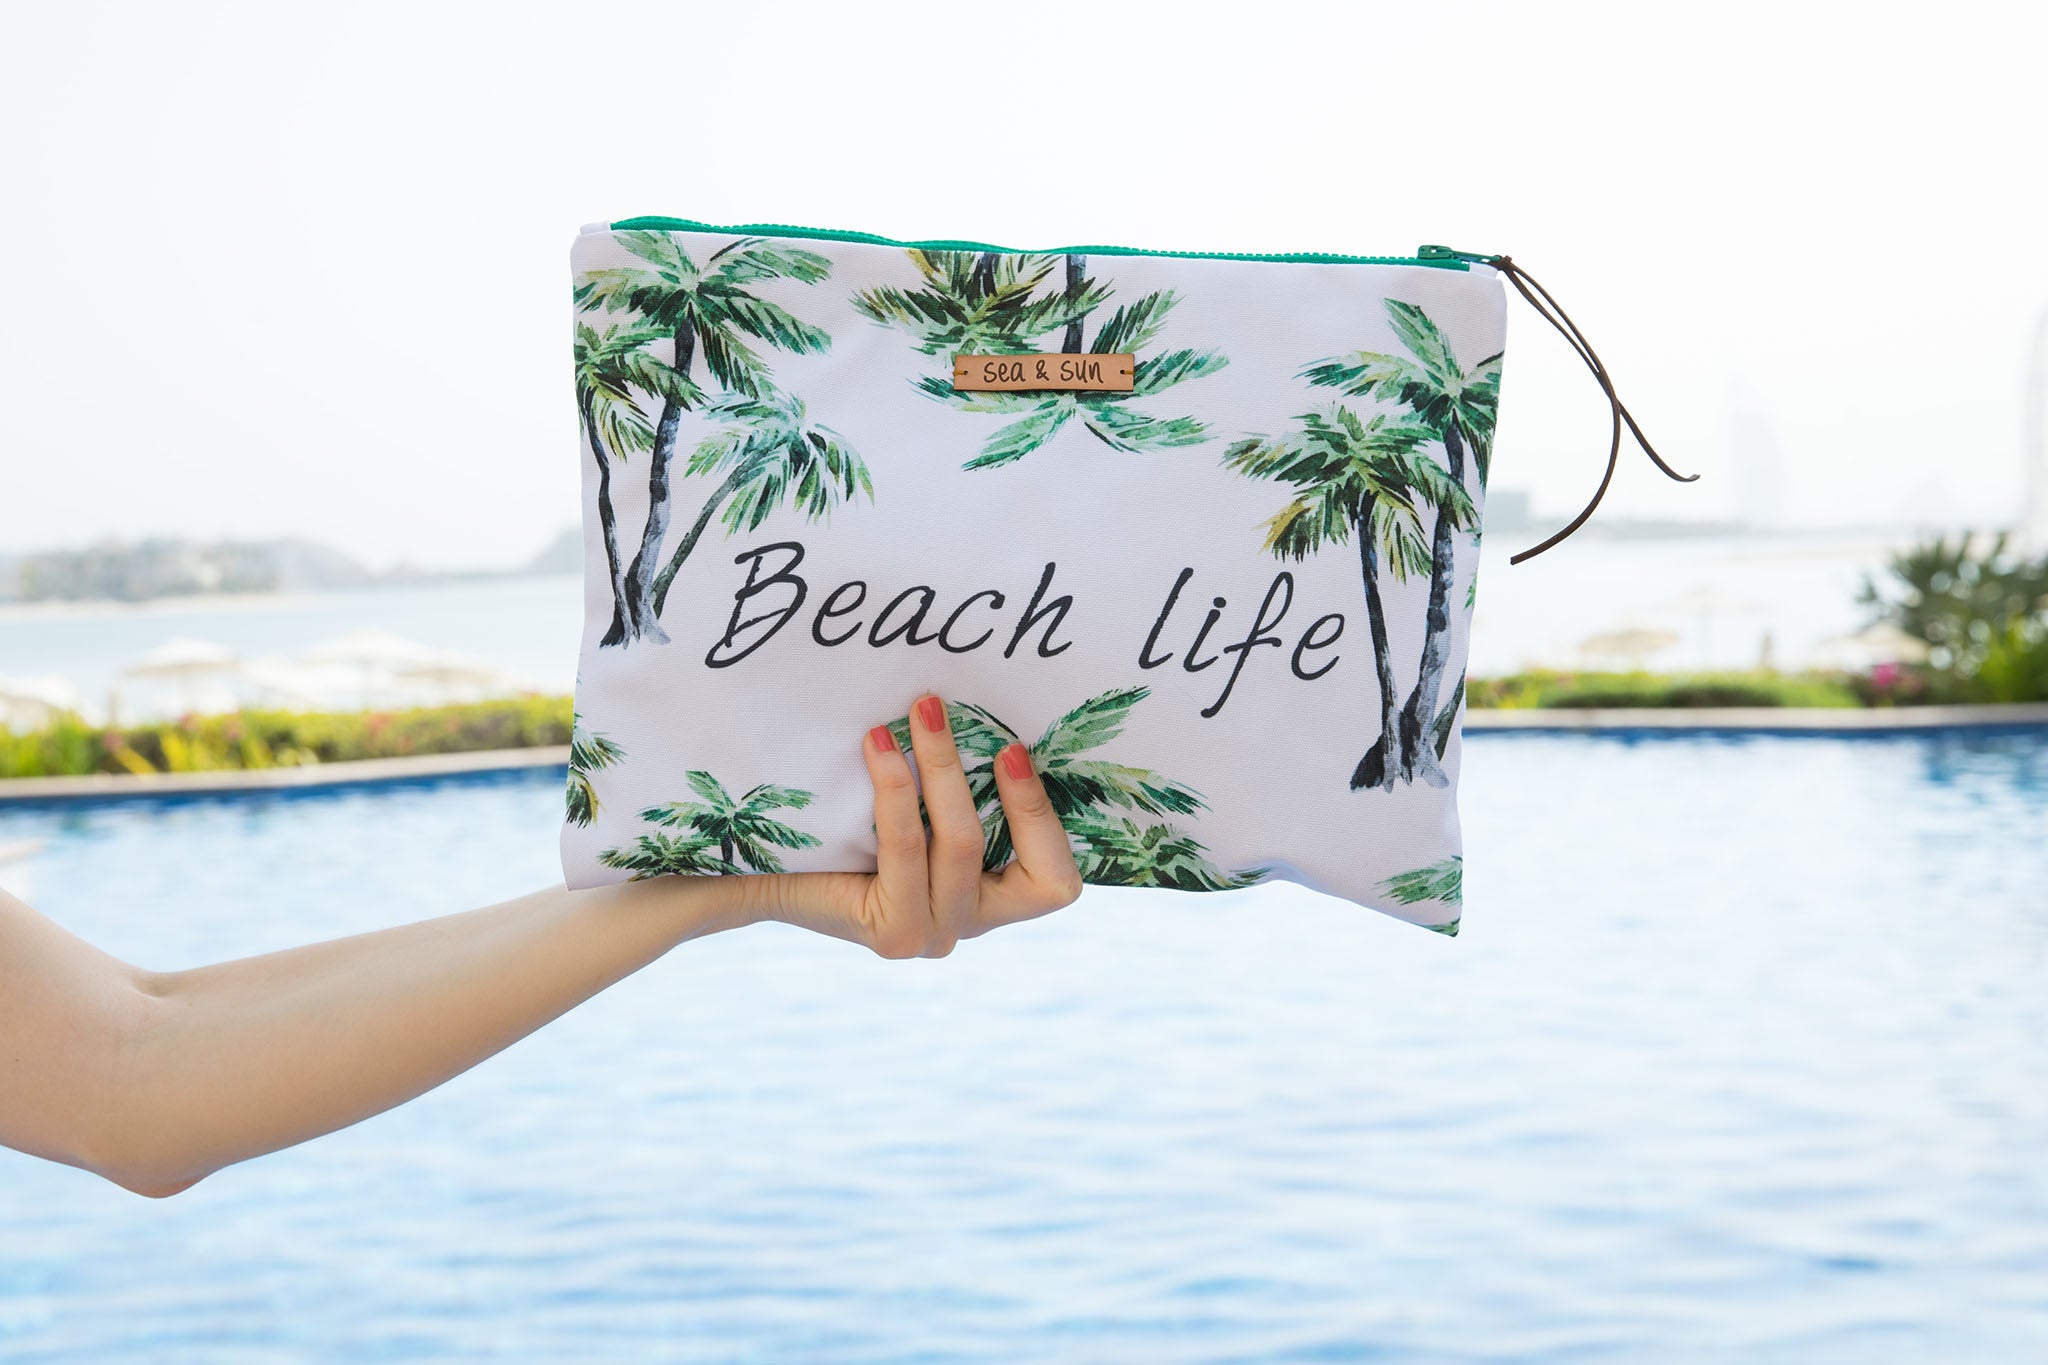 Beach Life Waterproof lined Bag for the Beach, Pool, Travel or Makeup - Kardia